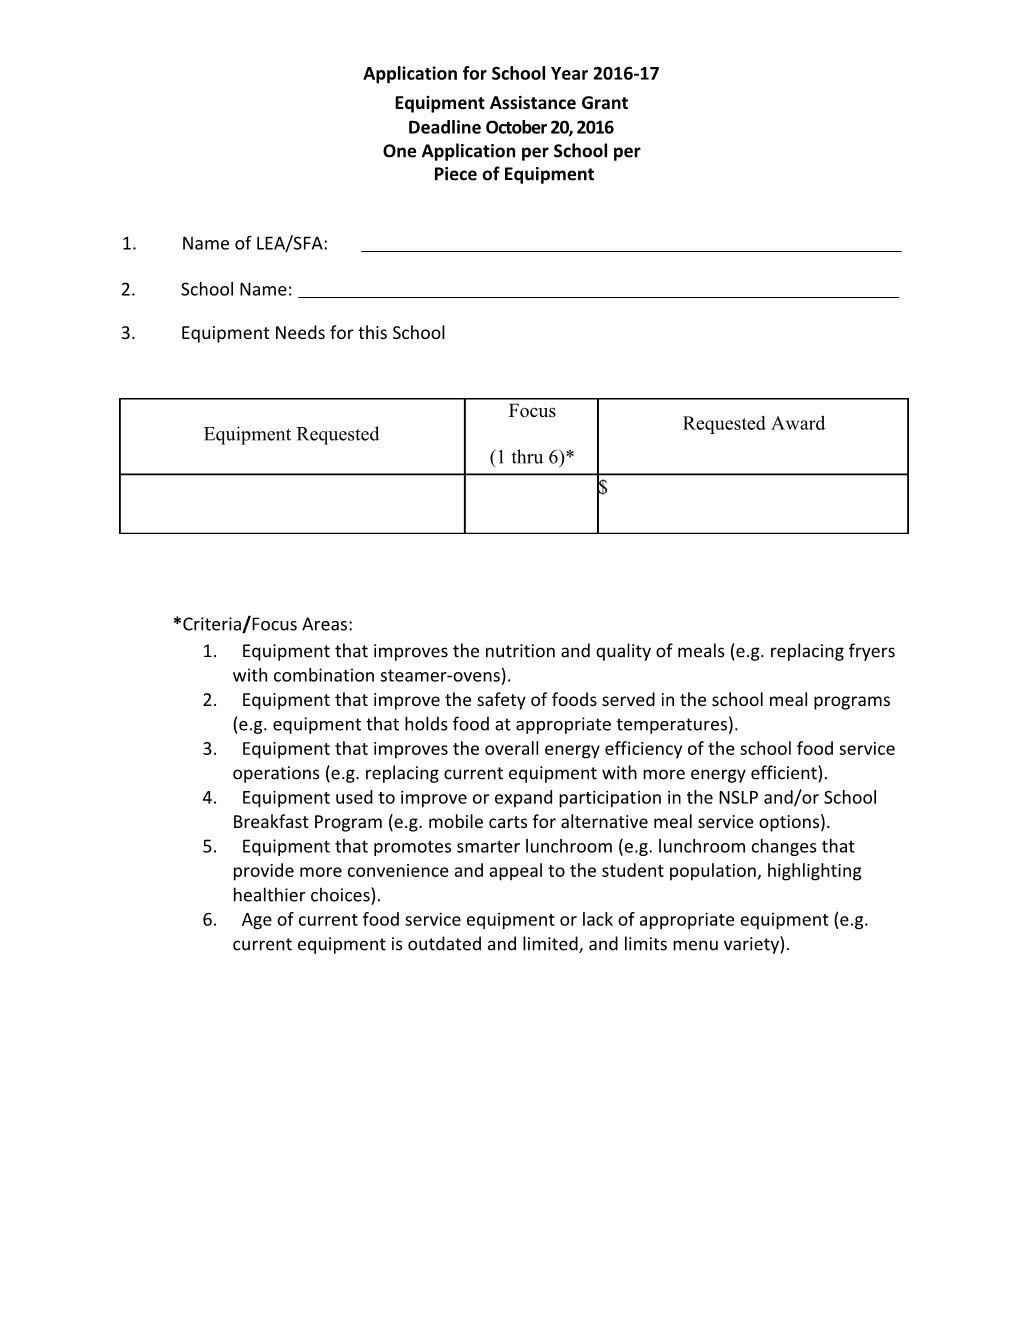 Application for 2009 Equipment Assistancegrant